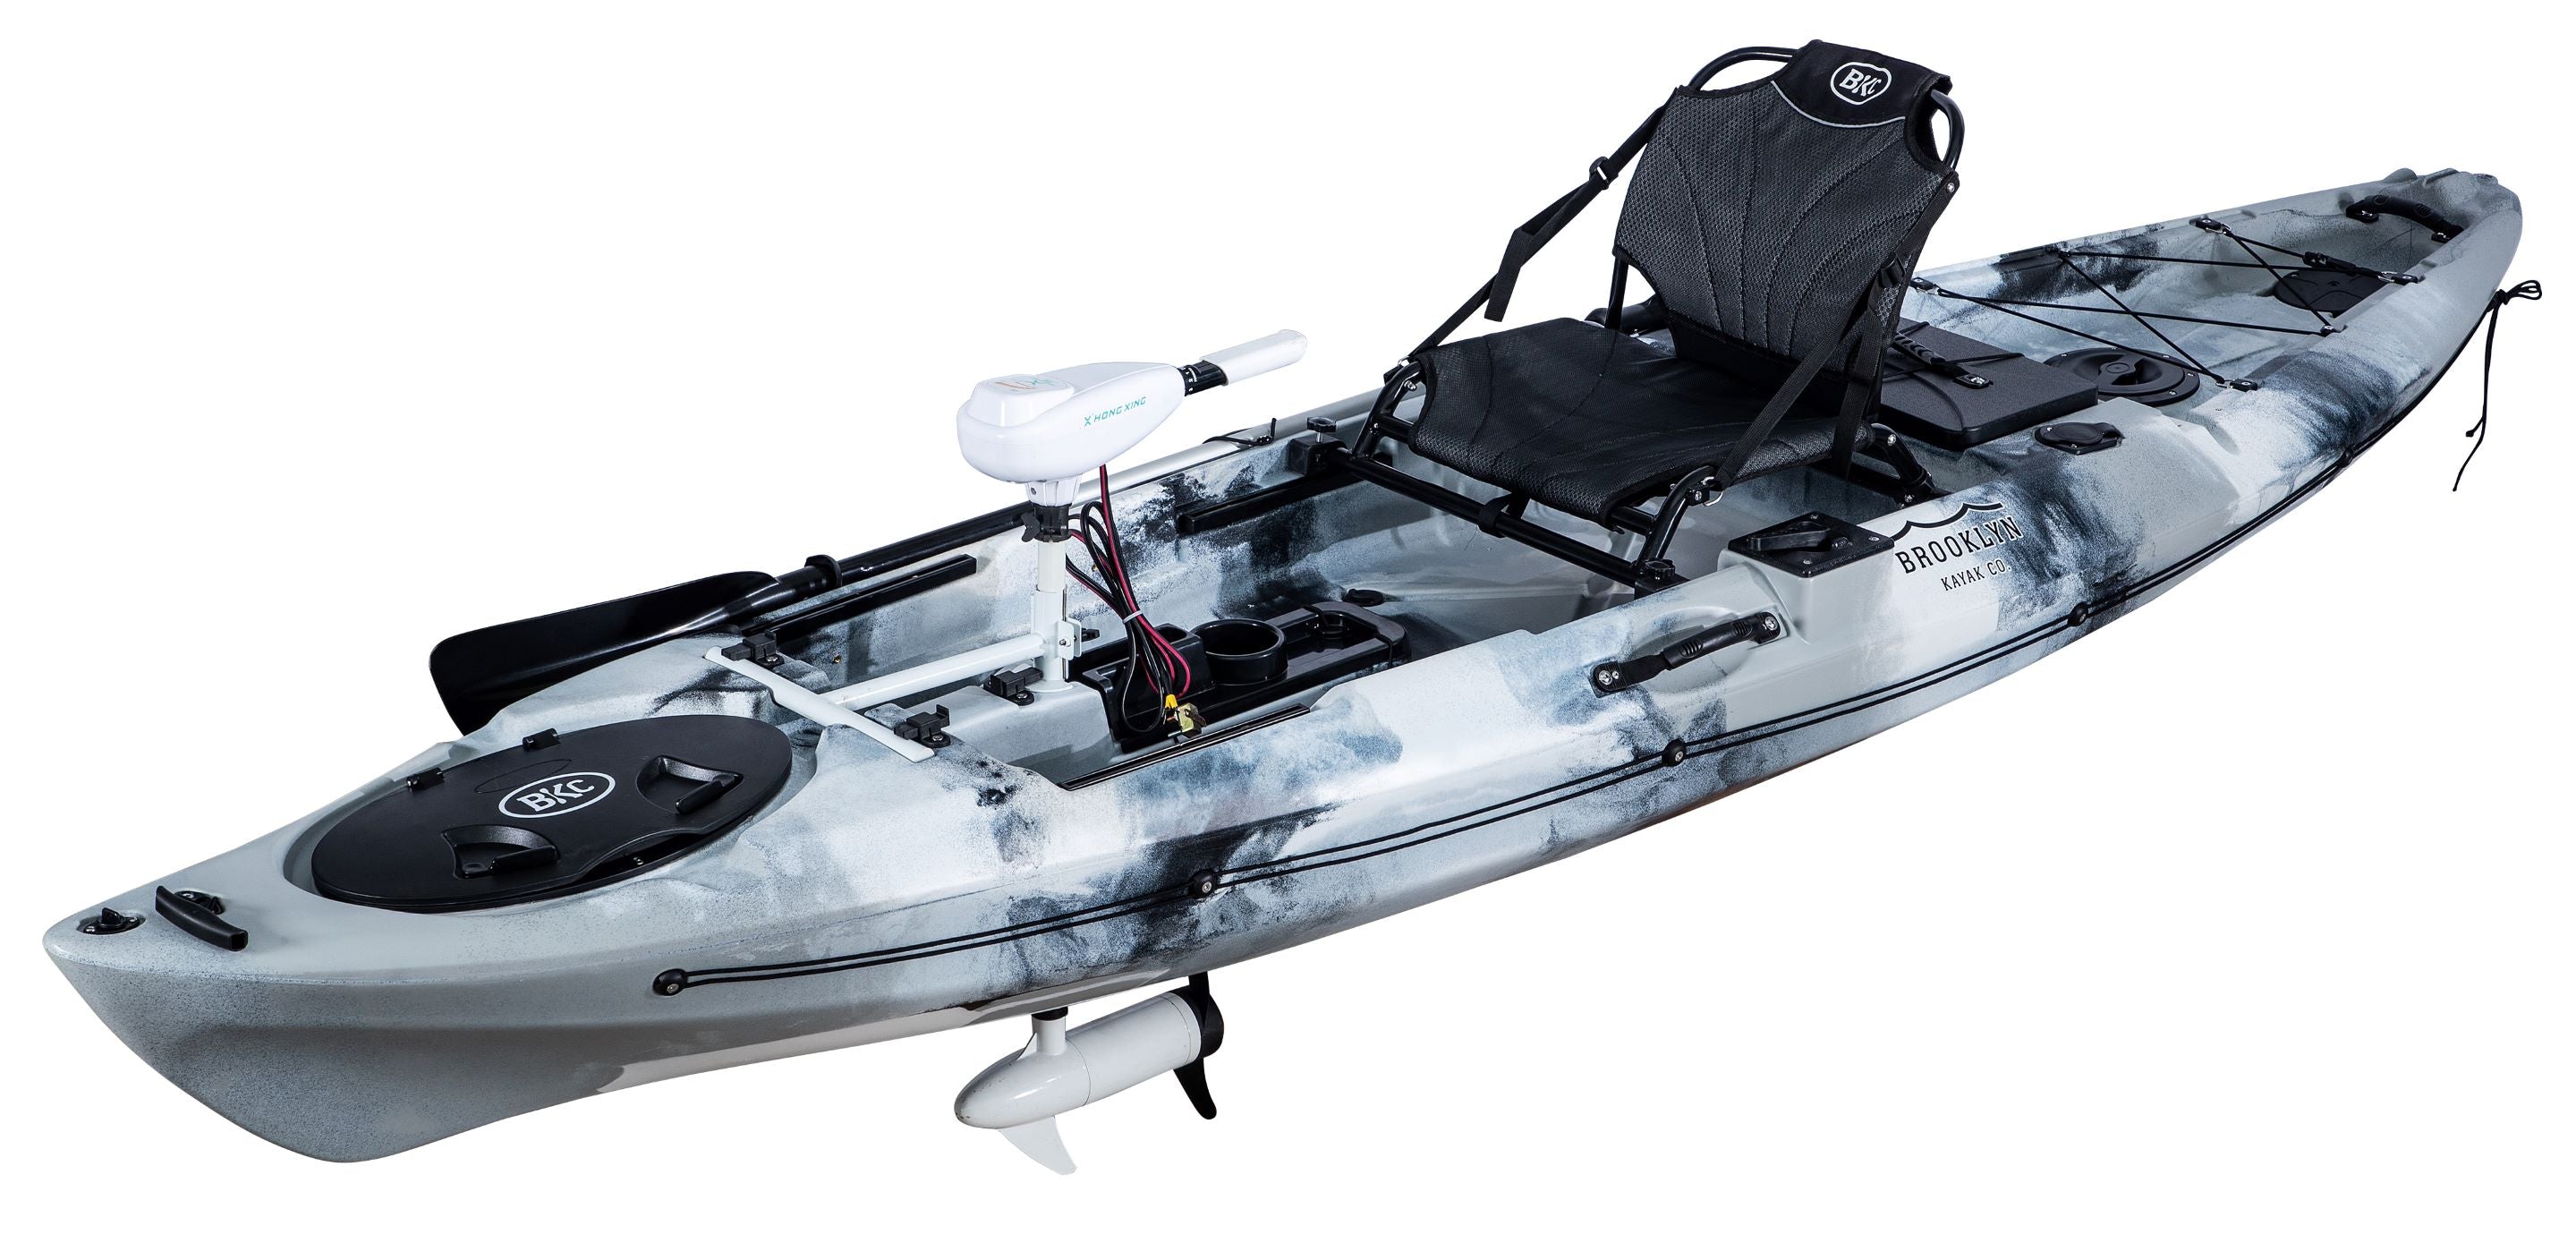 12ft Single Person Sit On Top Newest Fishing Kayak With Flap Pedal